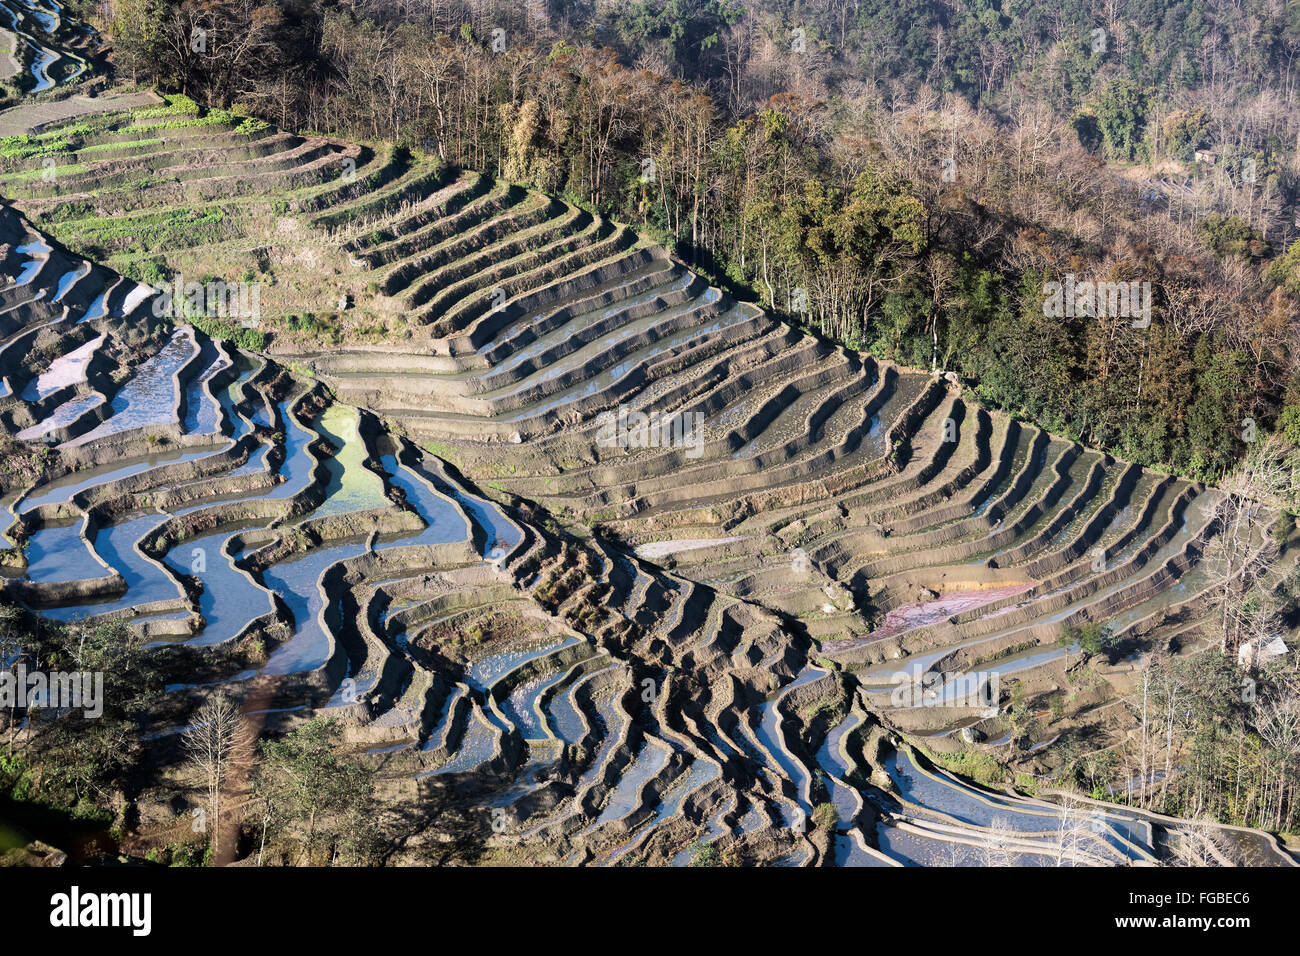 Sustainable farming, rice terraces and forest, Stock Photo